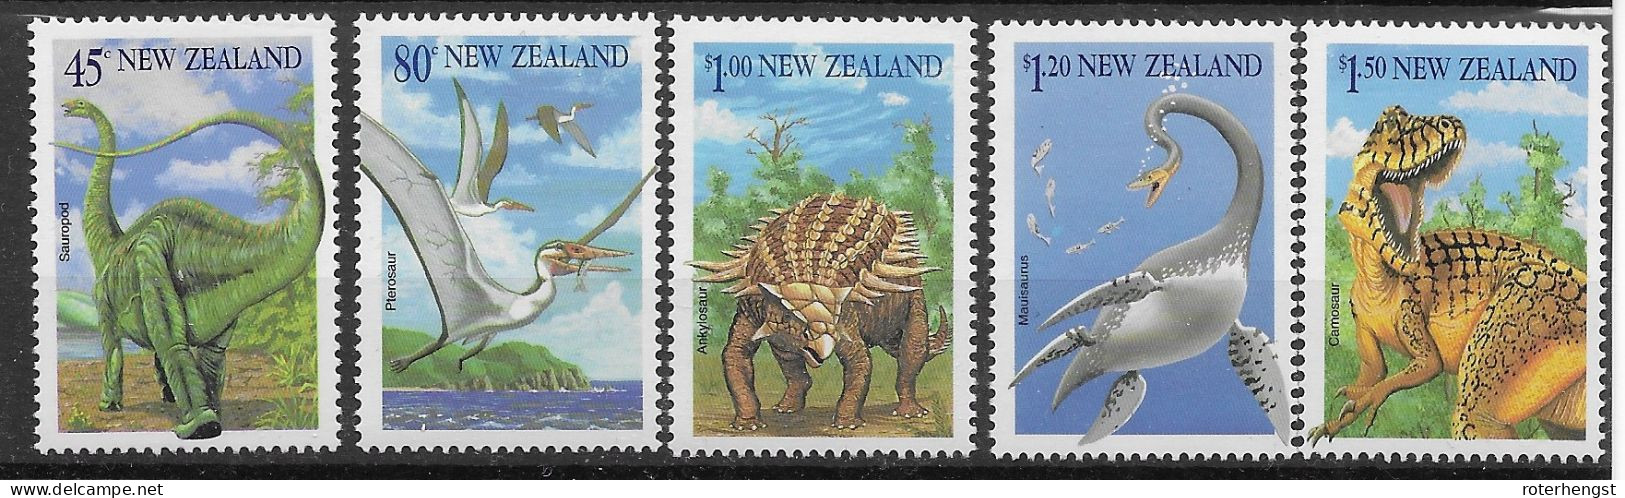 New Zealand Mnh ** 1993 Dinosaurs Set Without Booklet Stamp - Neufs